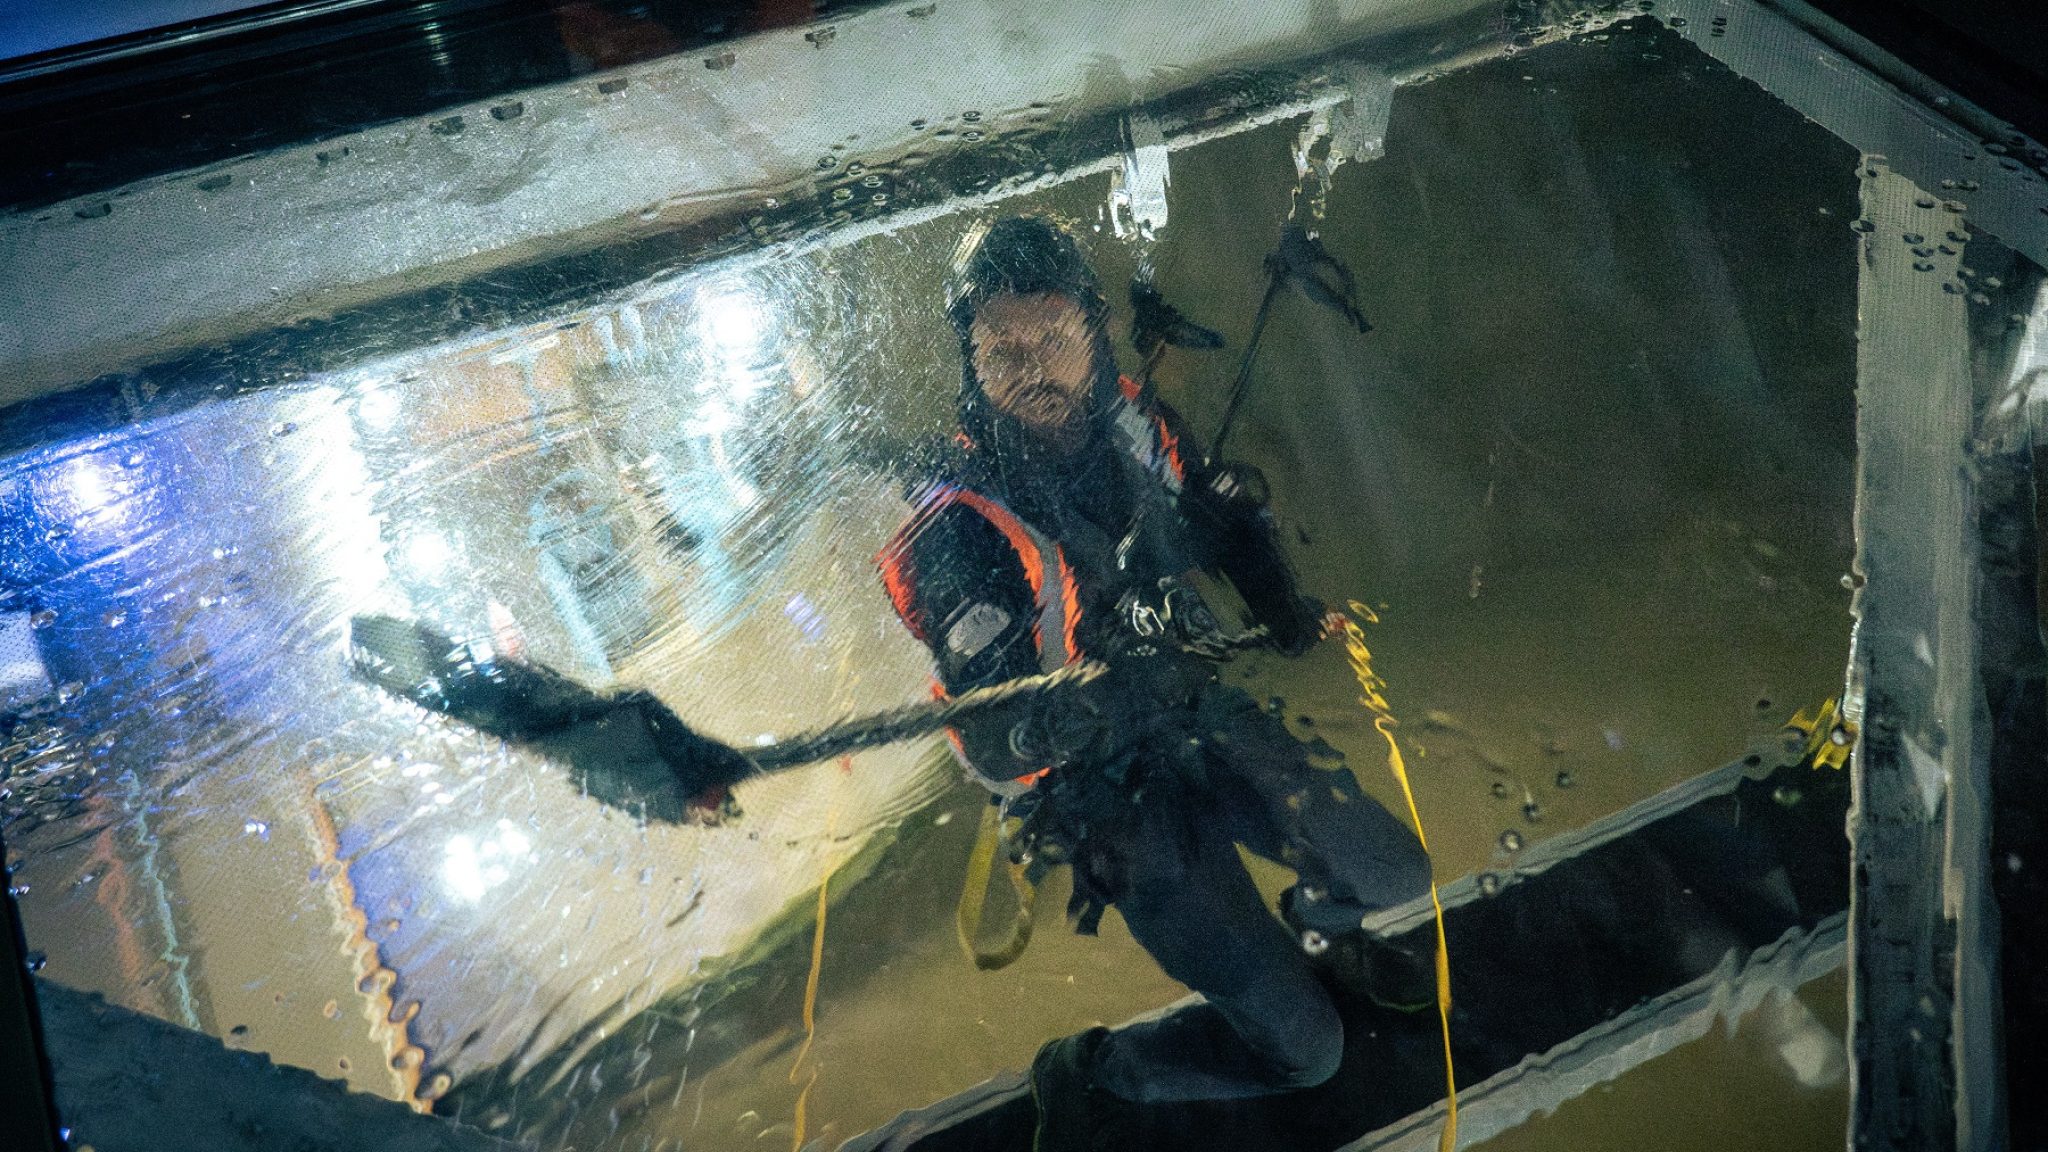 An abseiling worker cleans the underside of the glass floors at Tower Bridge